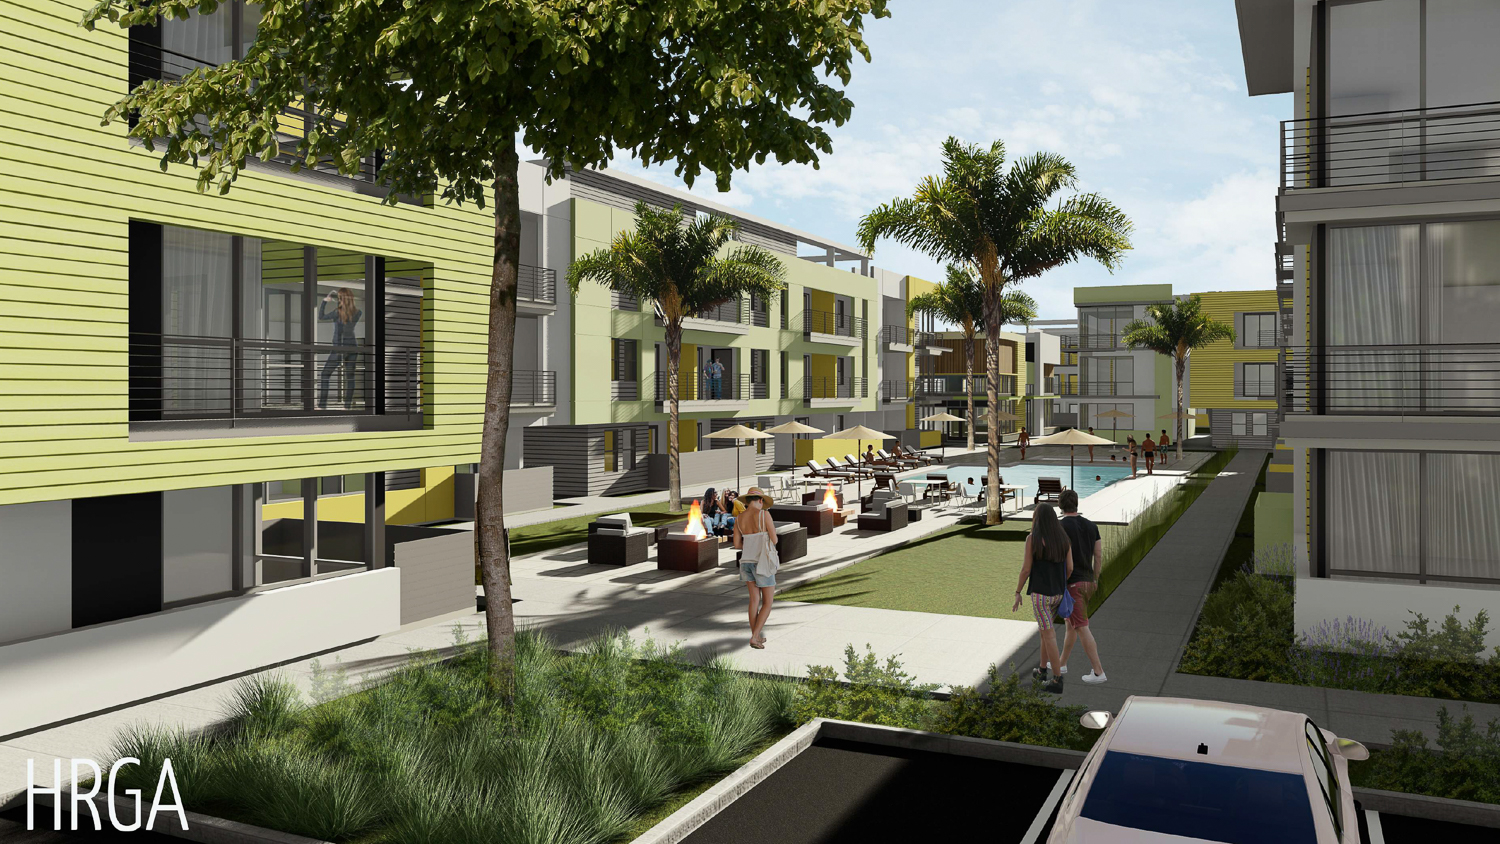 Bruceville Apartments amenity deck view, rendering by HRGA Architects